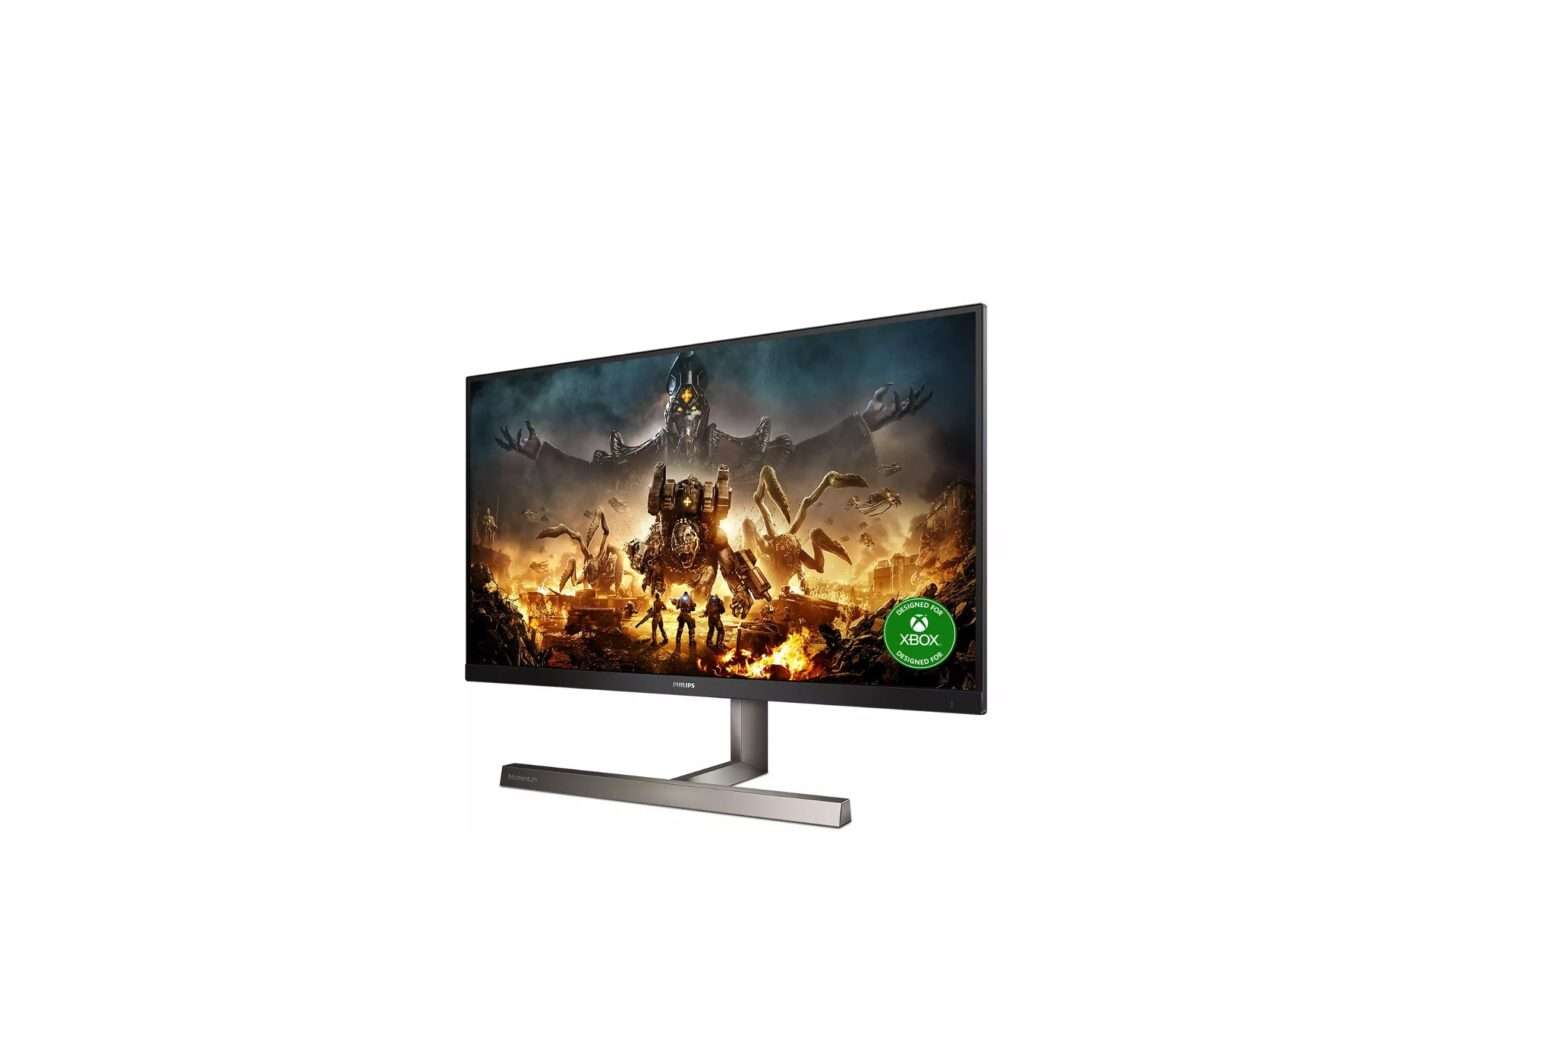 PHILIPS 329M1 Momentum 4K HDR Display Gaming Monitor User Guide - Featured image